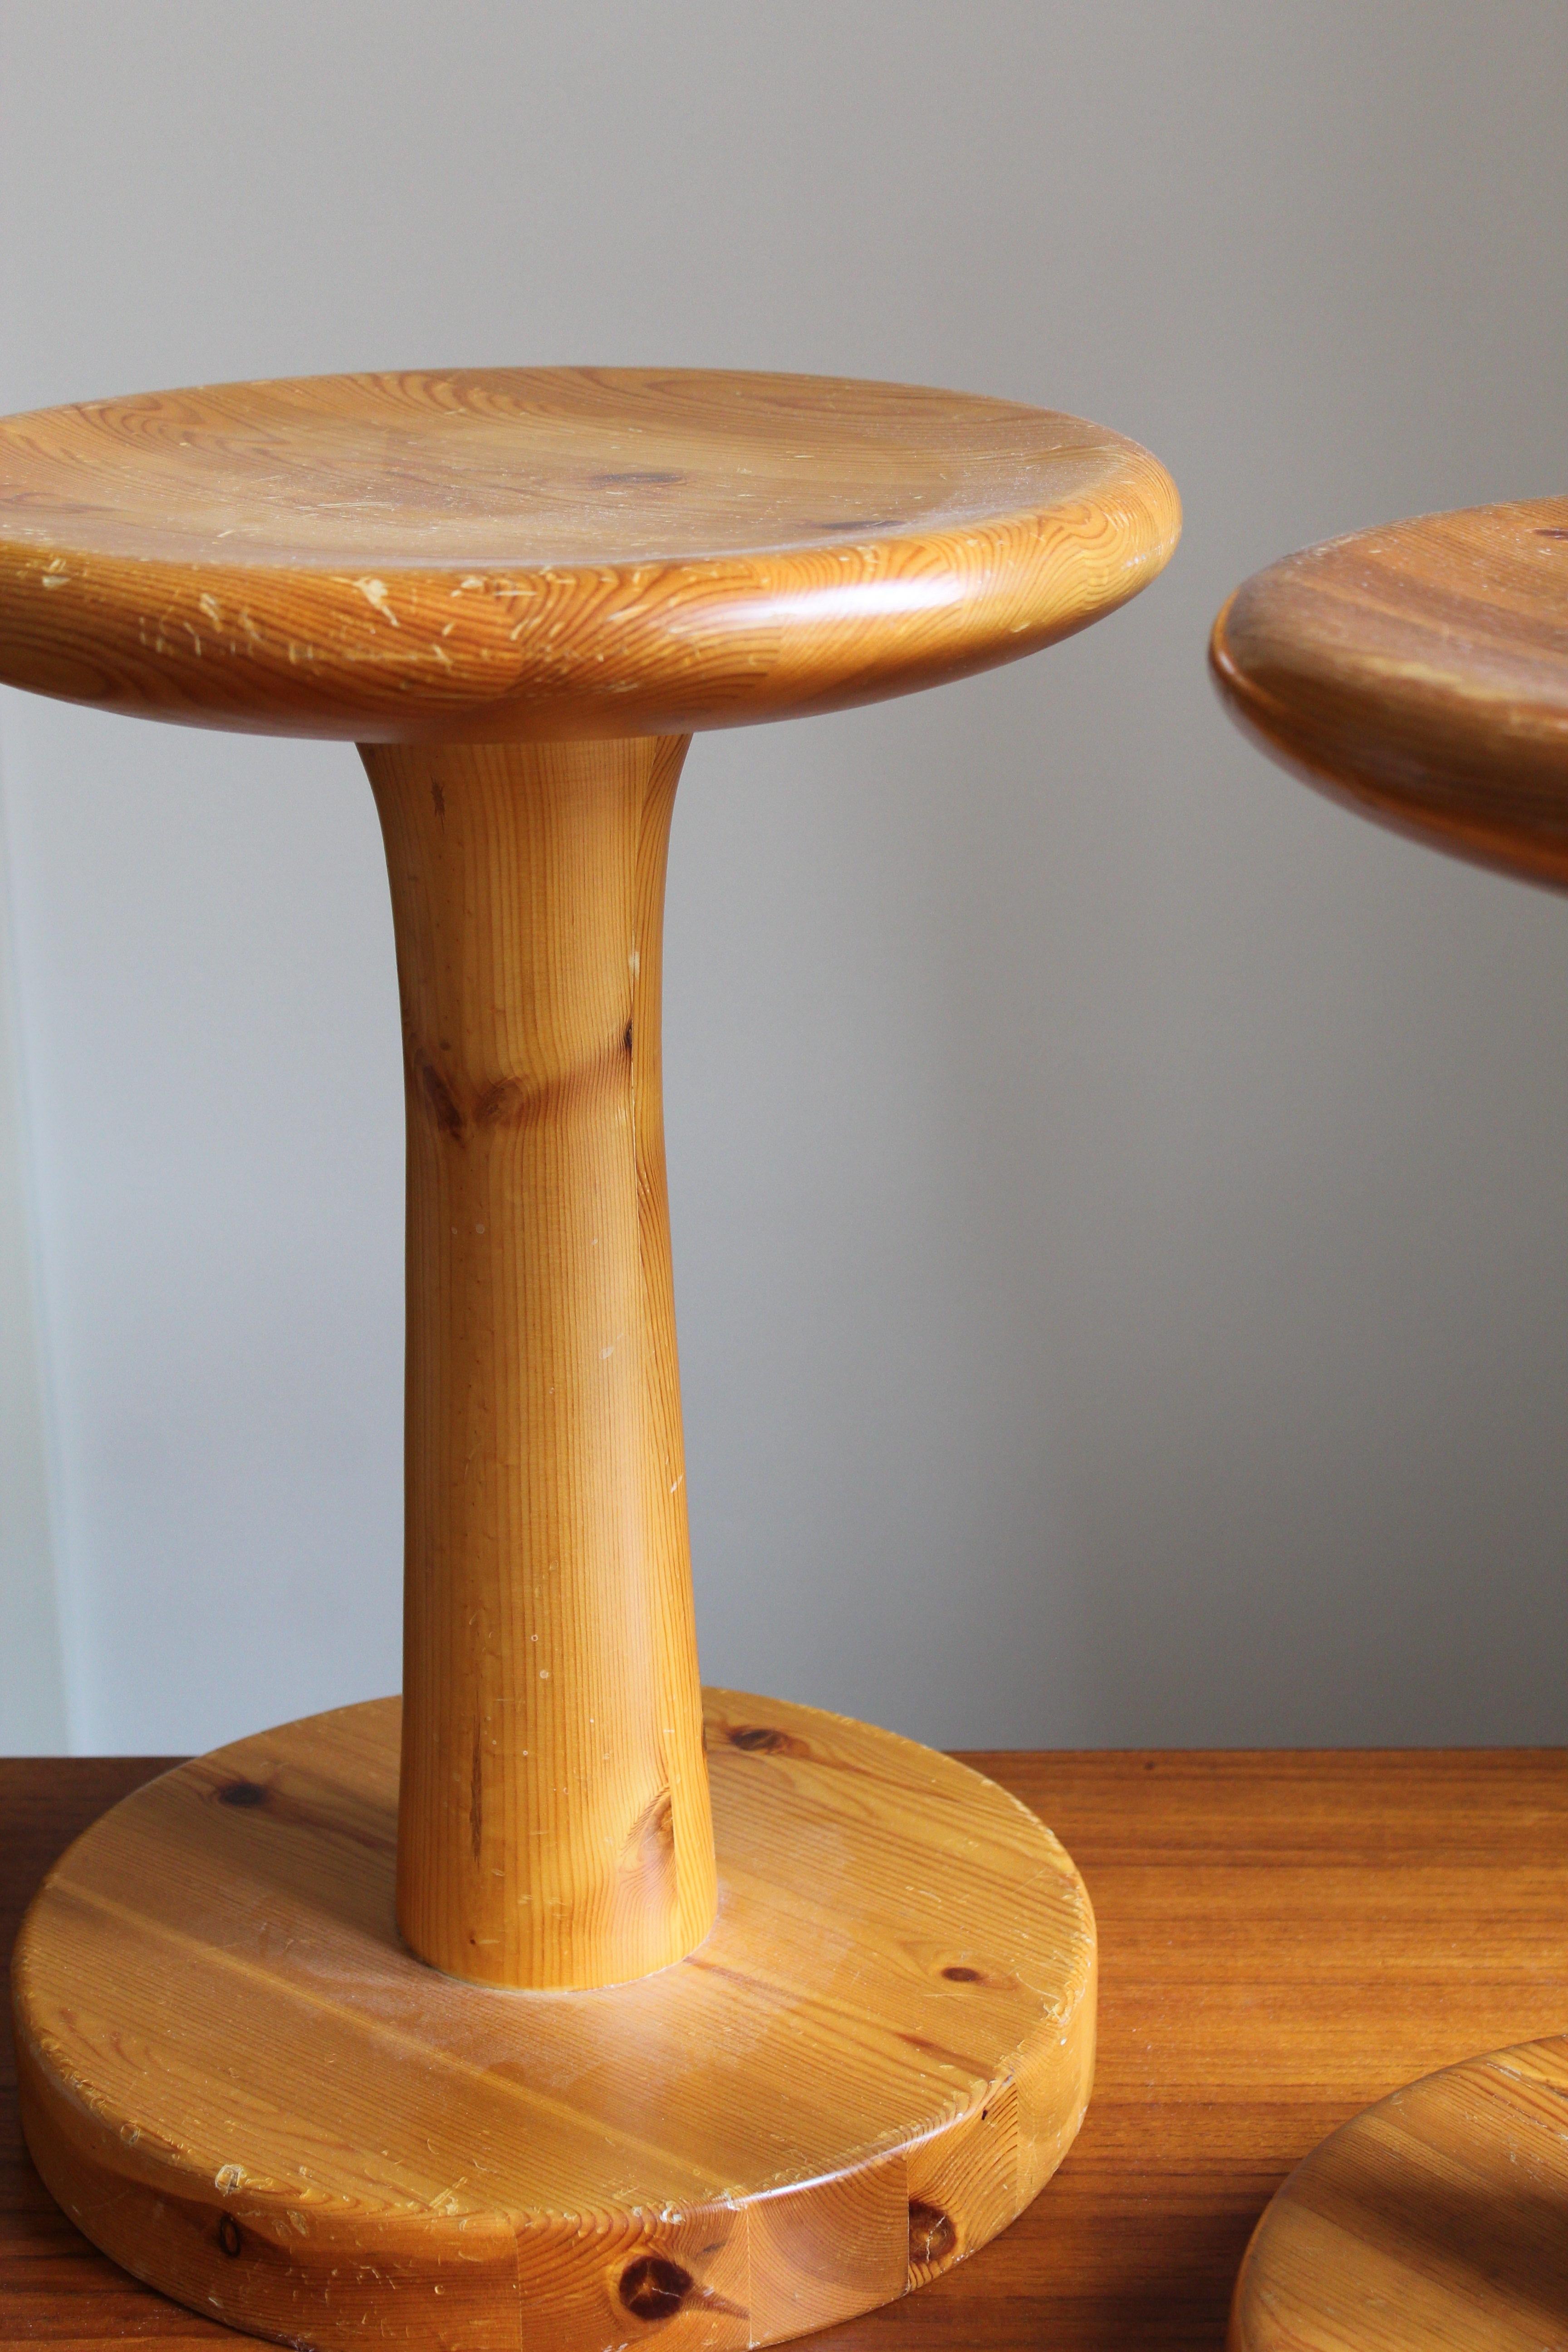 A Swedish pinewood stool or side table. By unknown designer, 1960s. Purity of form enhances the beauty of wood. 

Other designers of the period include Pierre Chapo, Charlotte Perriand, Axel Einar Hjorth, and Kaare Klint.





 